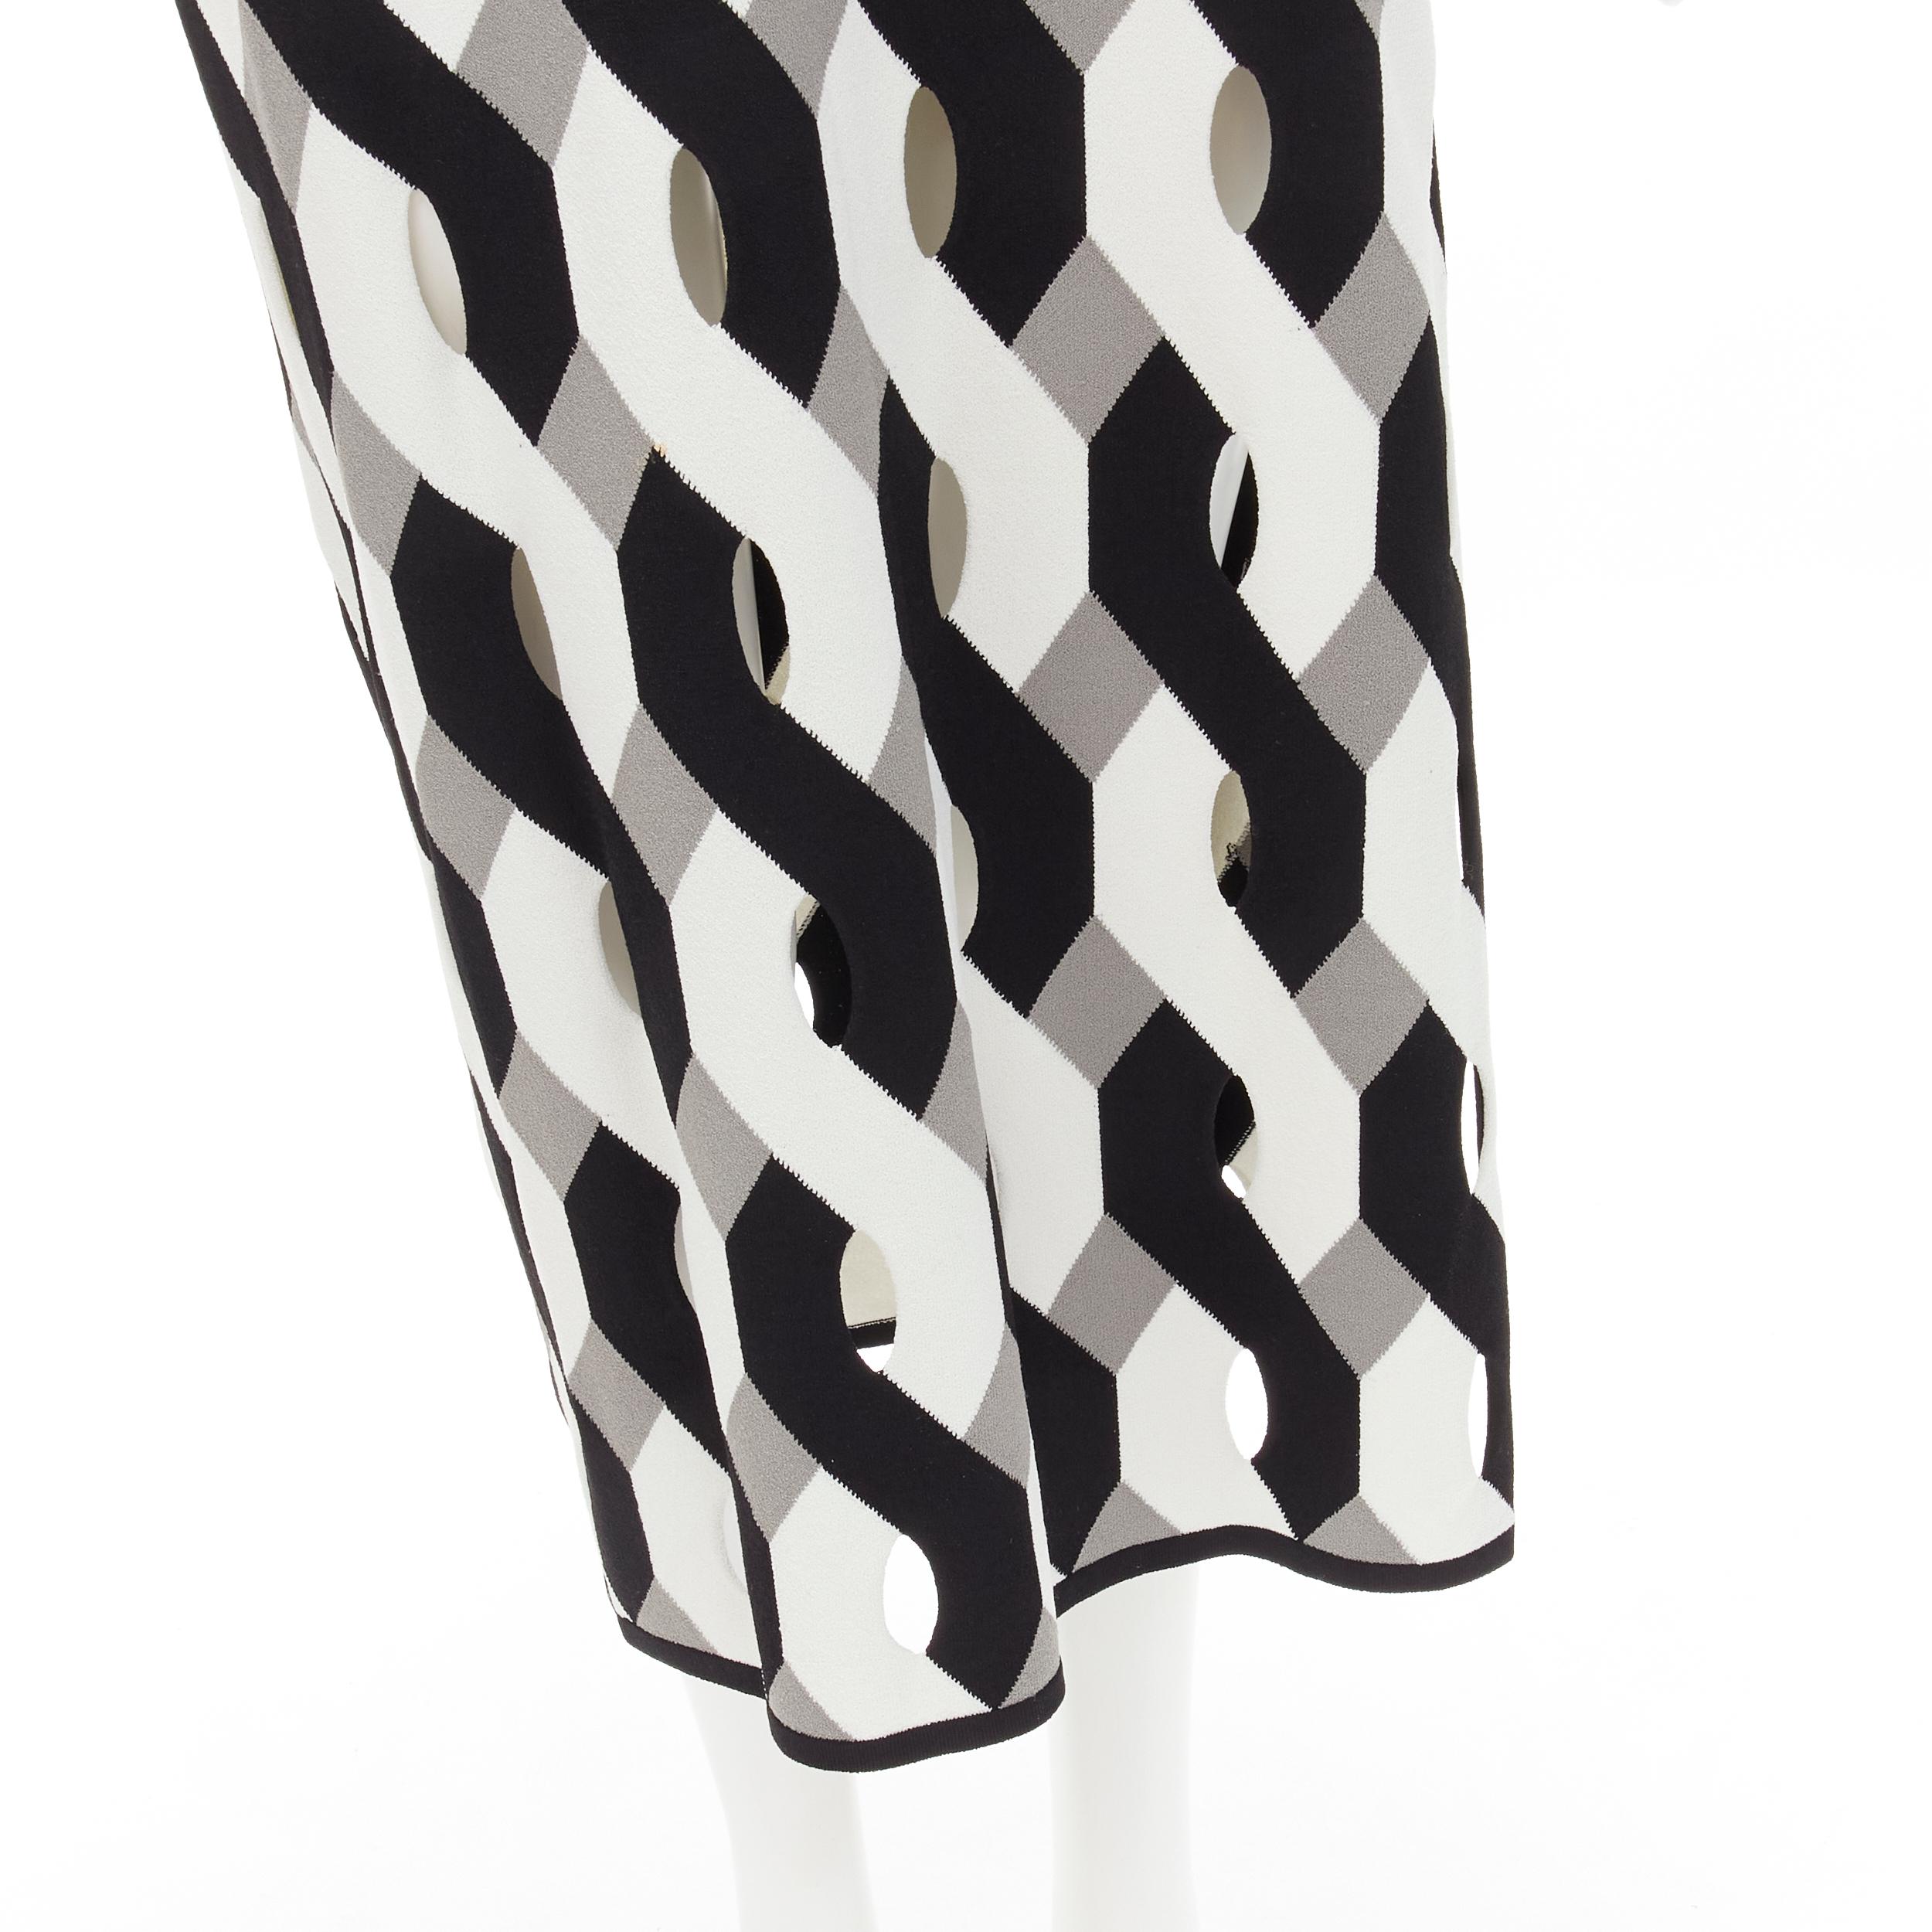 RAG & BONE black grey geometric woven cut out knitted dress S For Sale 4